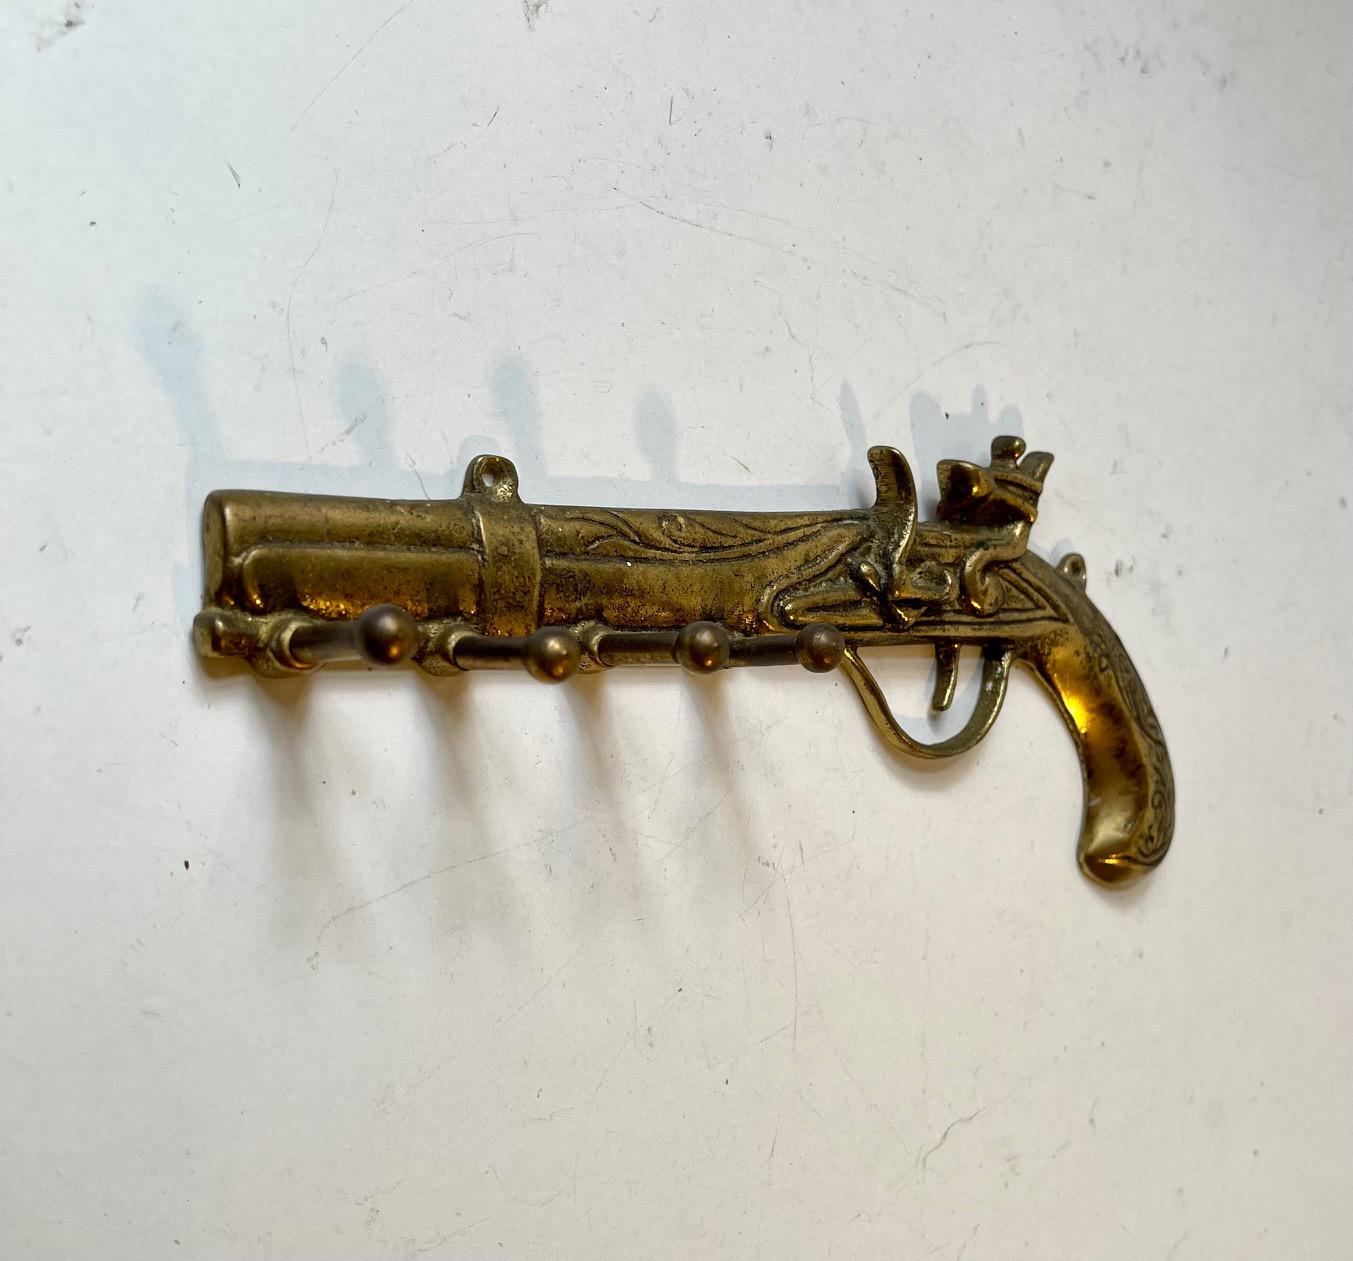 Unusual wall mounted key holder in the shape of an antique flintlock pistol. Its made from cast solid brass and features 4 hooks for your keys. It was made in Italy during the 1970s and brought home to Denmark by a tourist. Measurements: W/L: 22 cm,